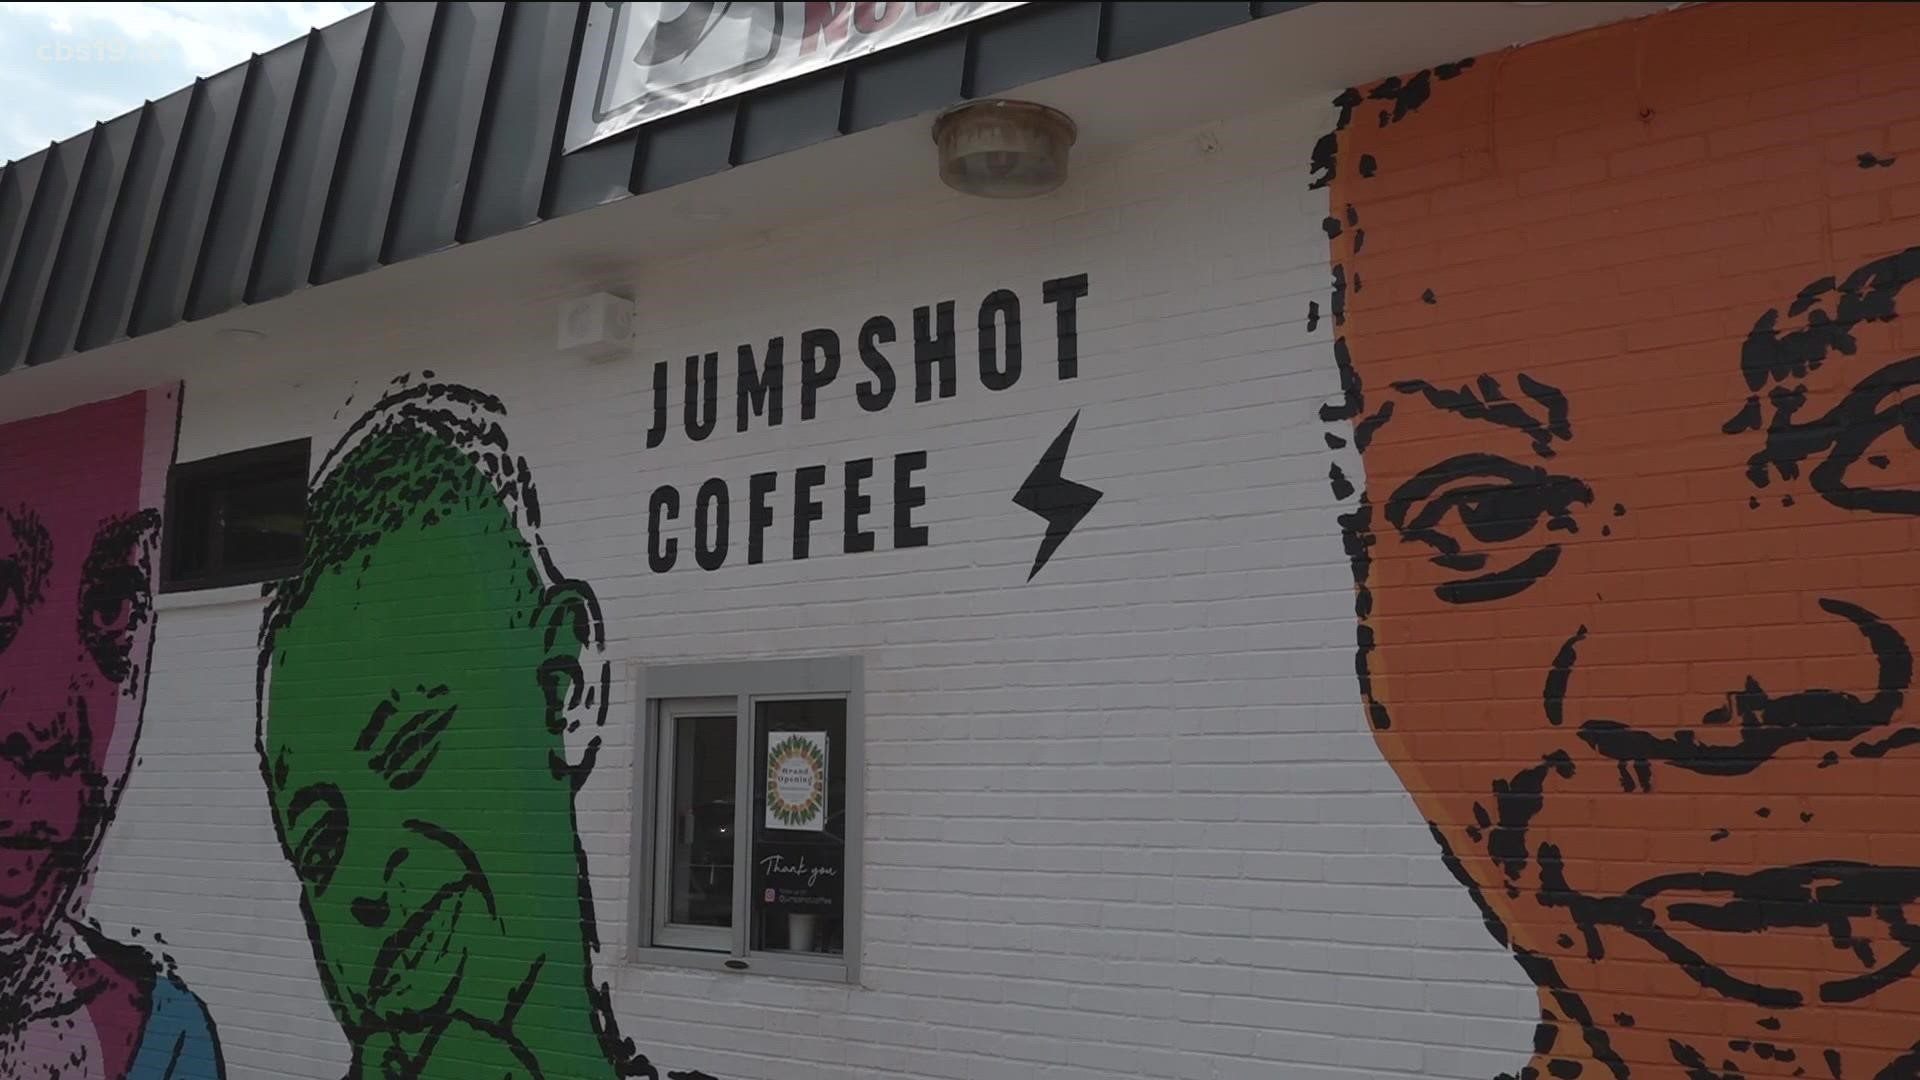 Jumpshot Coffee is donating portions of their proceeds to children in Uganda.